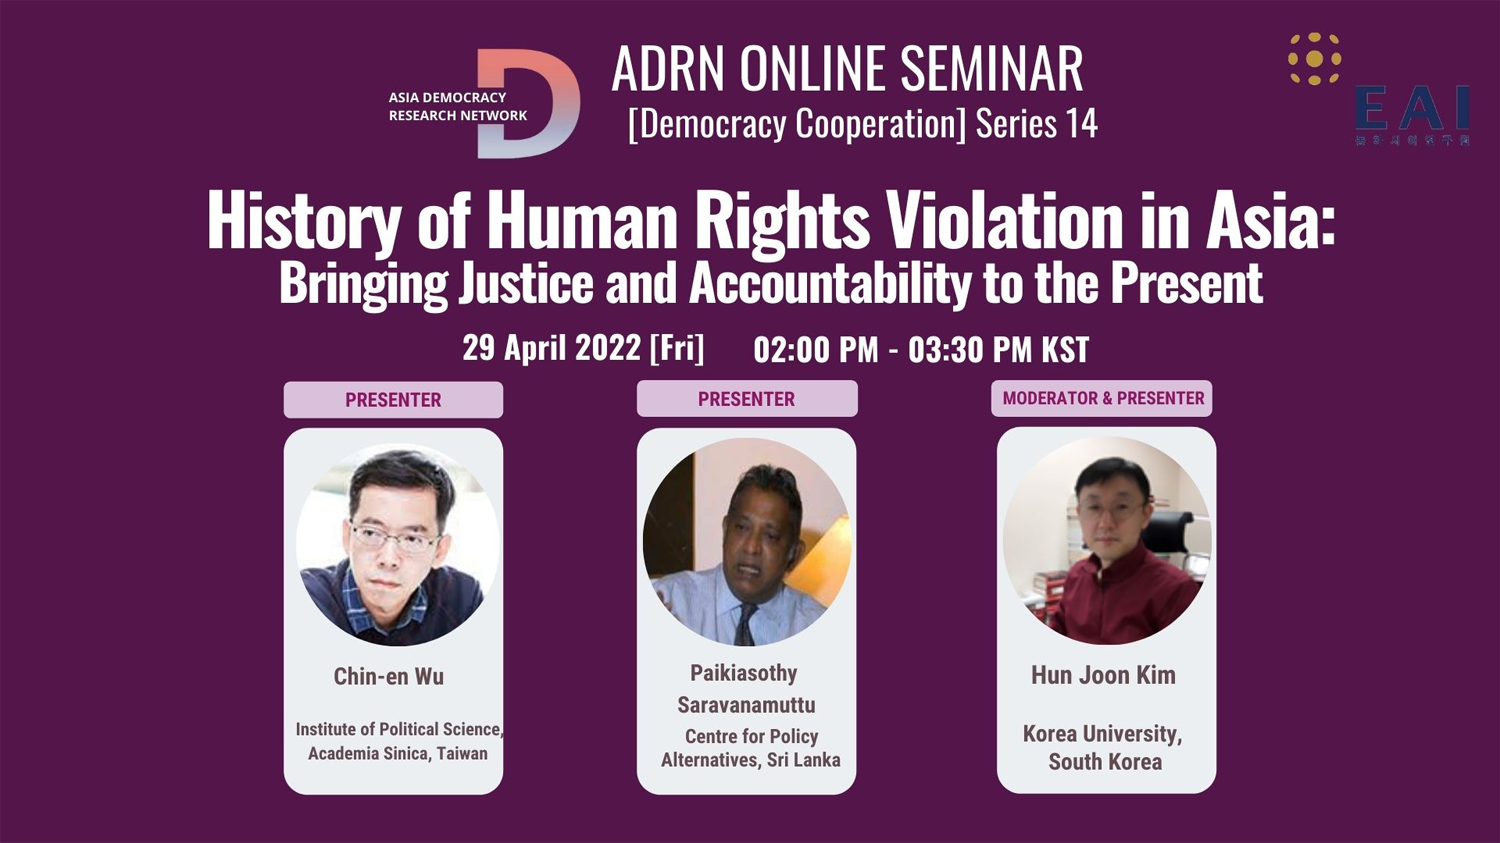 [ADRN Online Seminar] Democracy Cooperation Series 14: History of Human Rights Violations in Asia